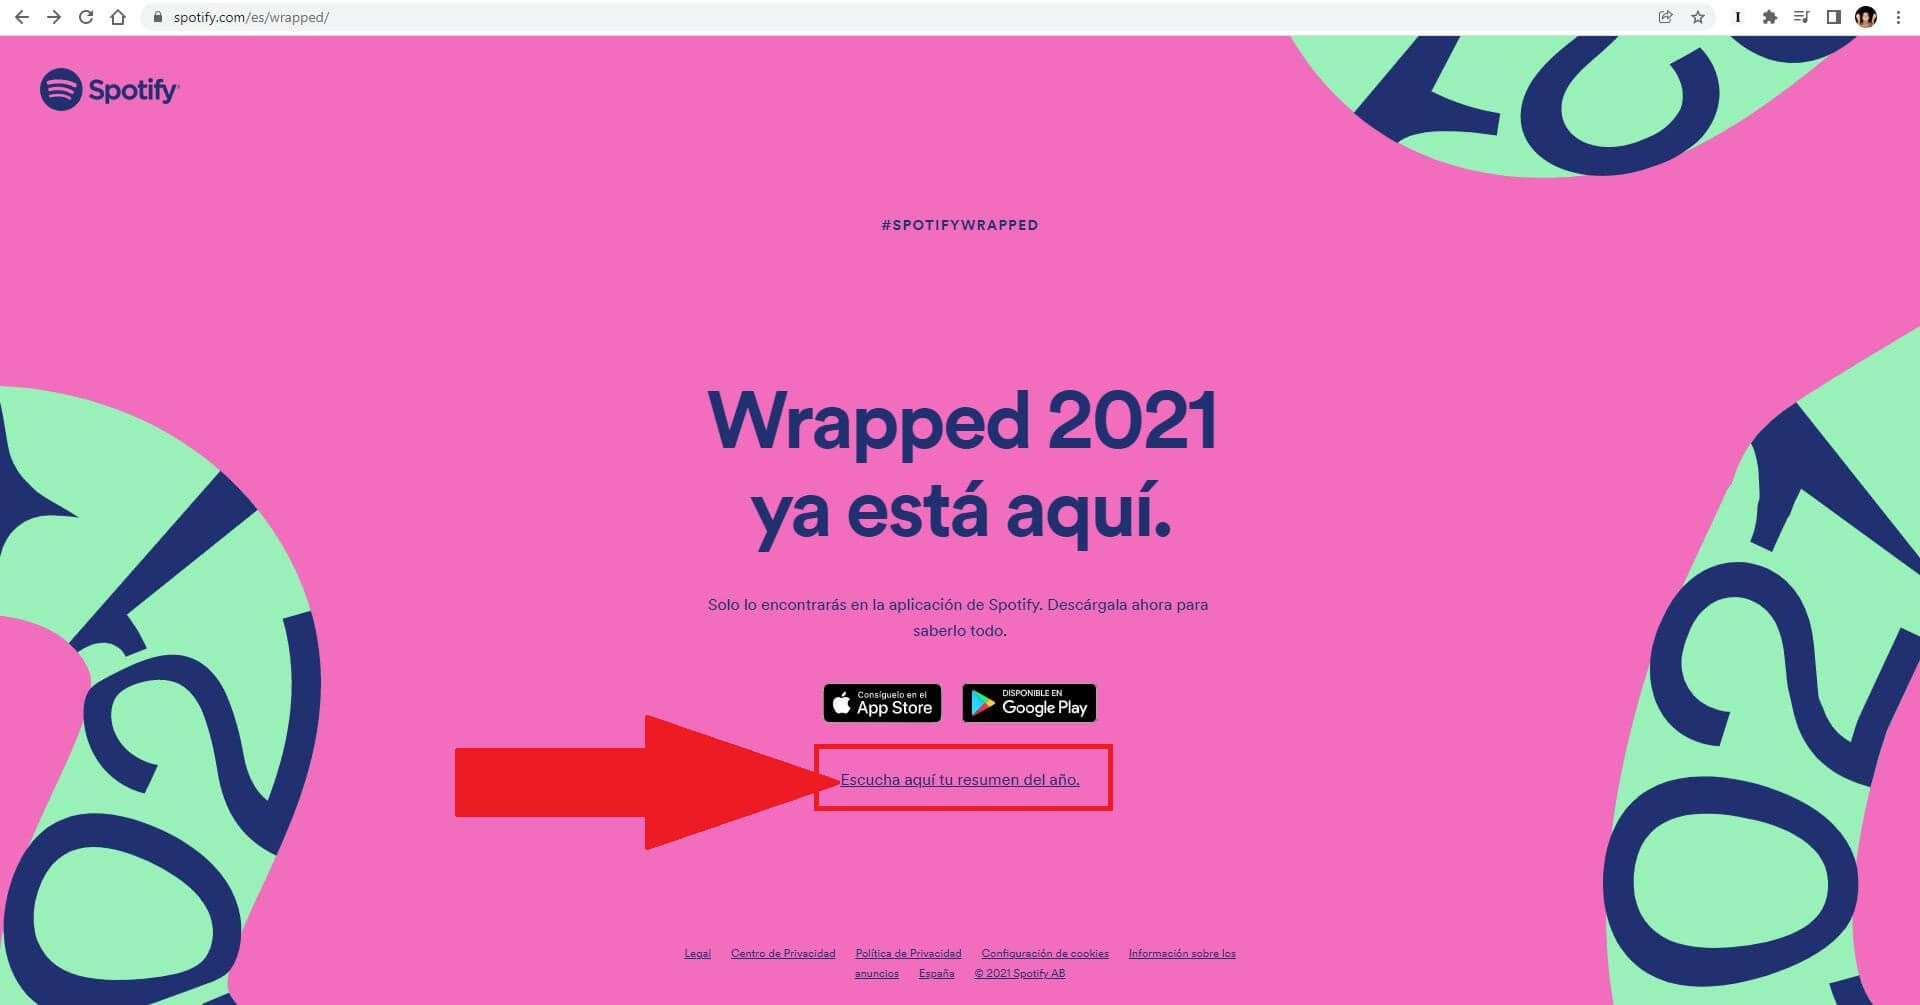 spotify wraoped 20201